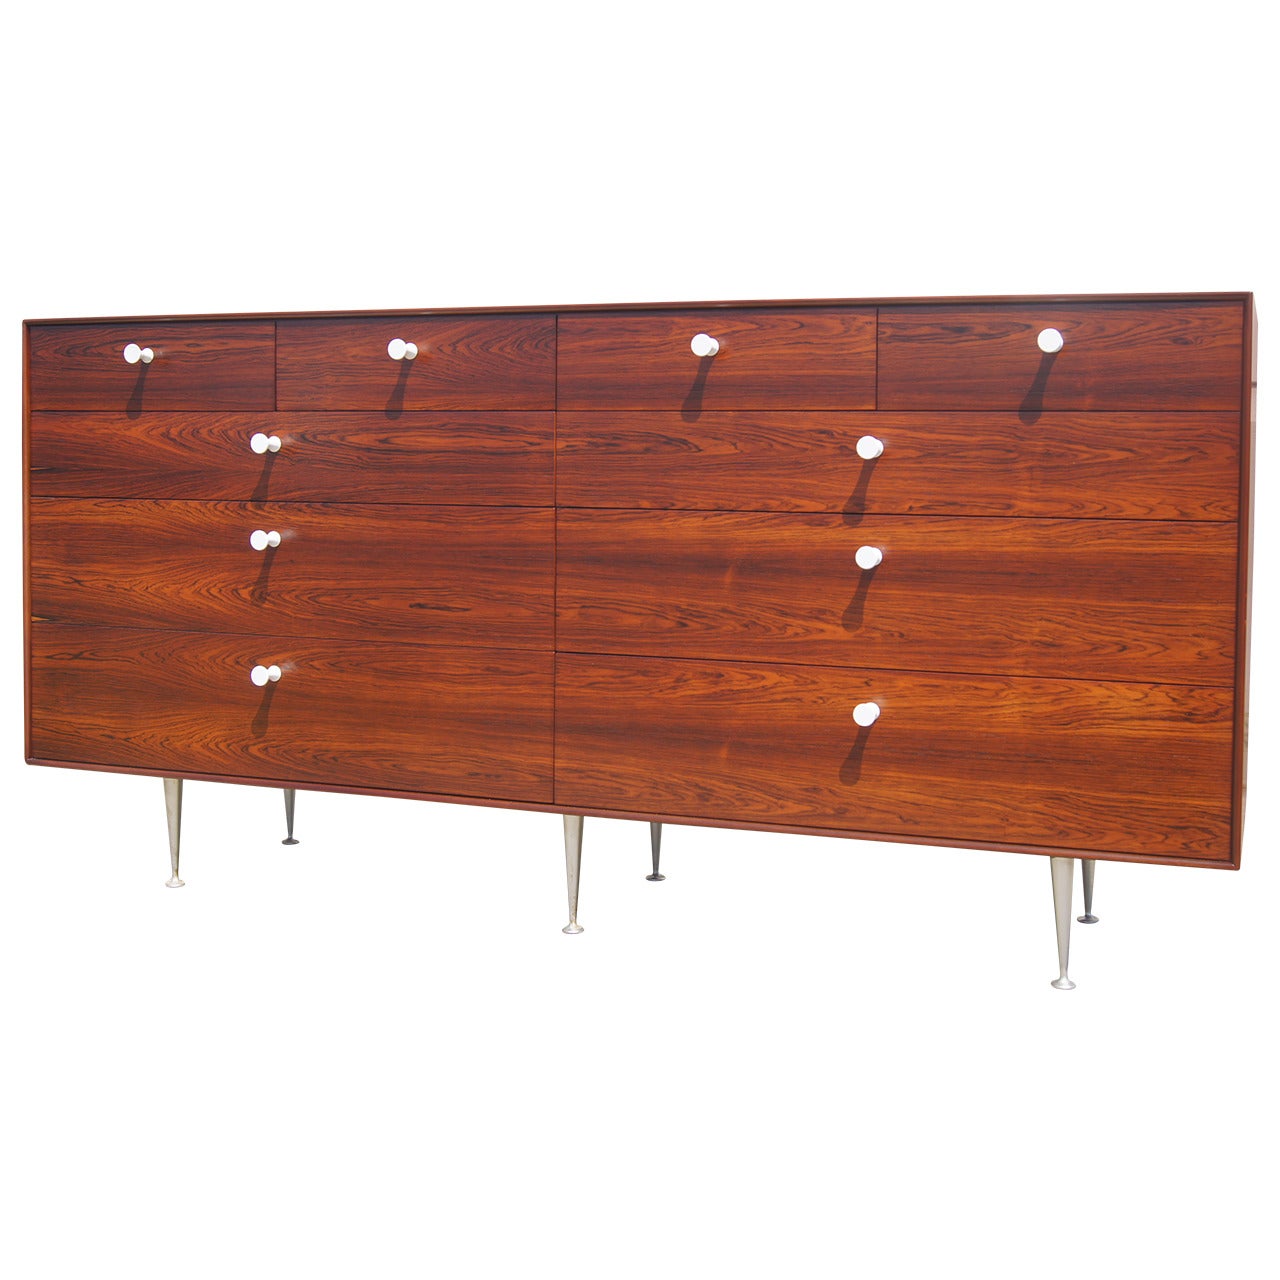 Early Thin Edge Ten-Drawer Rosewood Dresser by George Nelson for Herman Miller